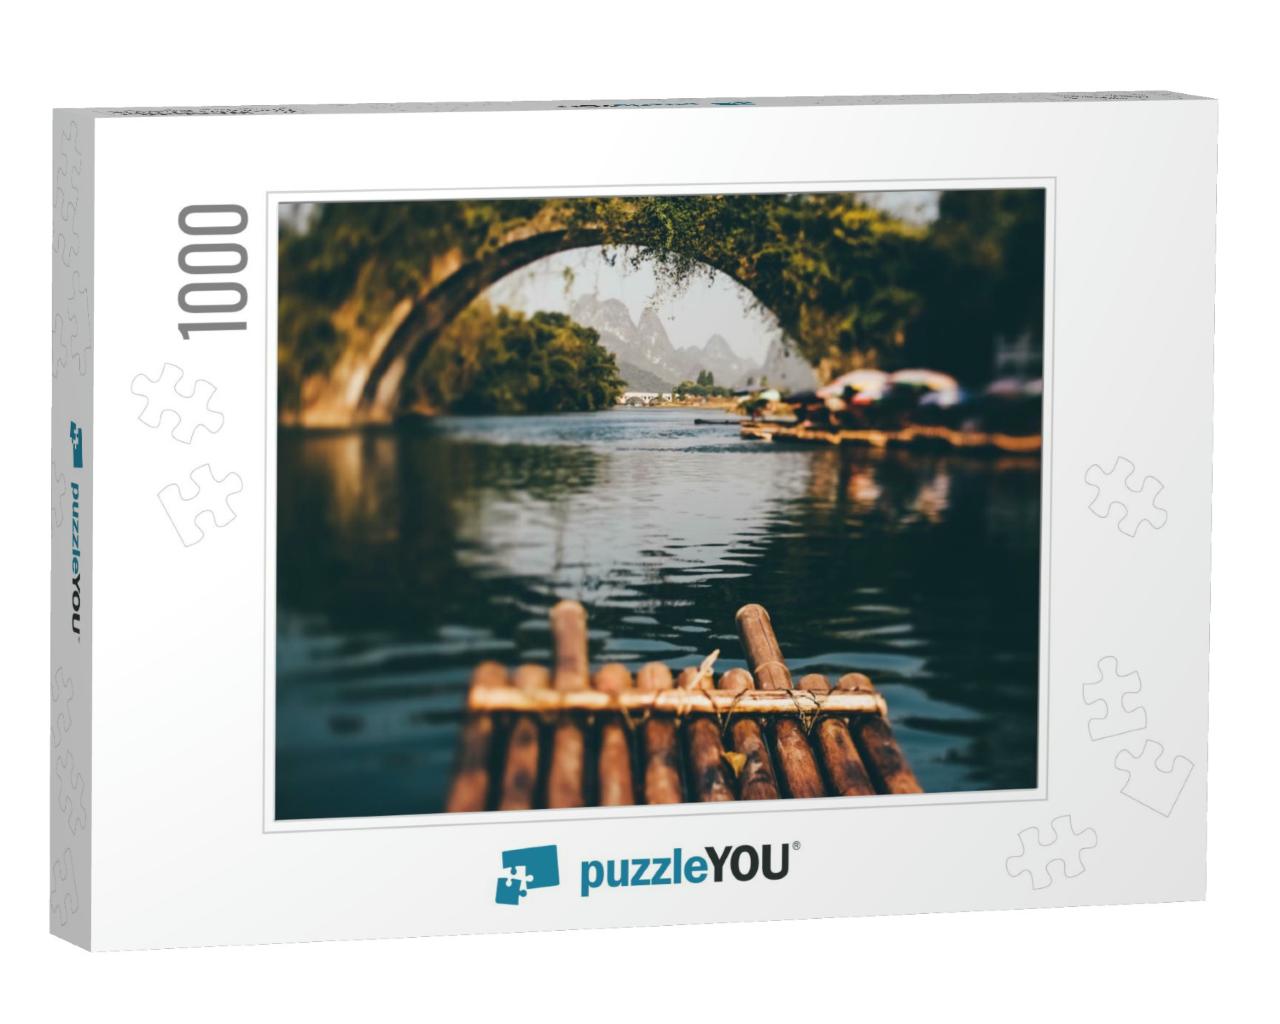 Bamboo Rafting in Li River, Guilin - Yangshou China. Reed... Jigsaw Puzzle with 1000 pieces